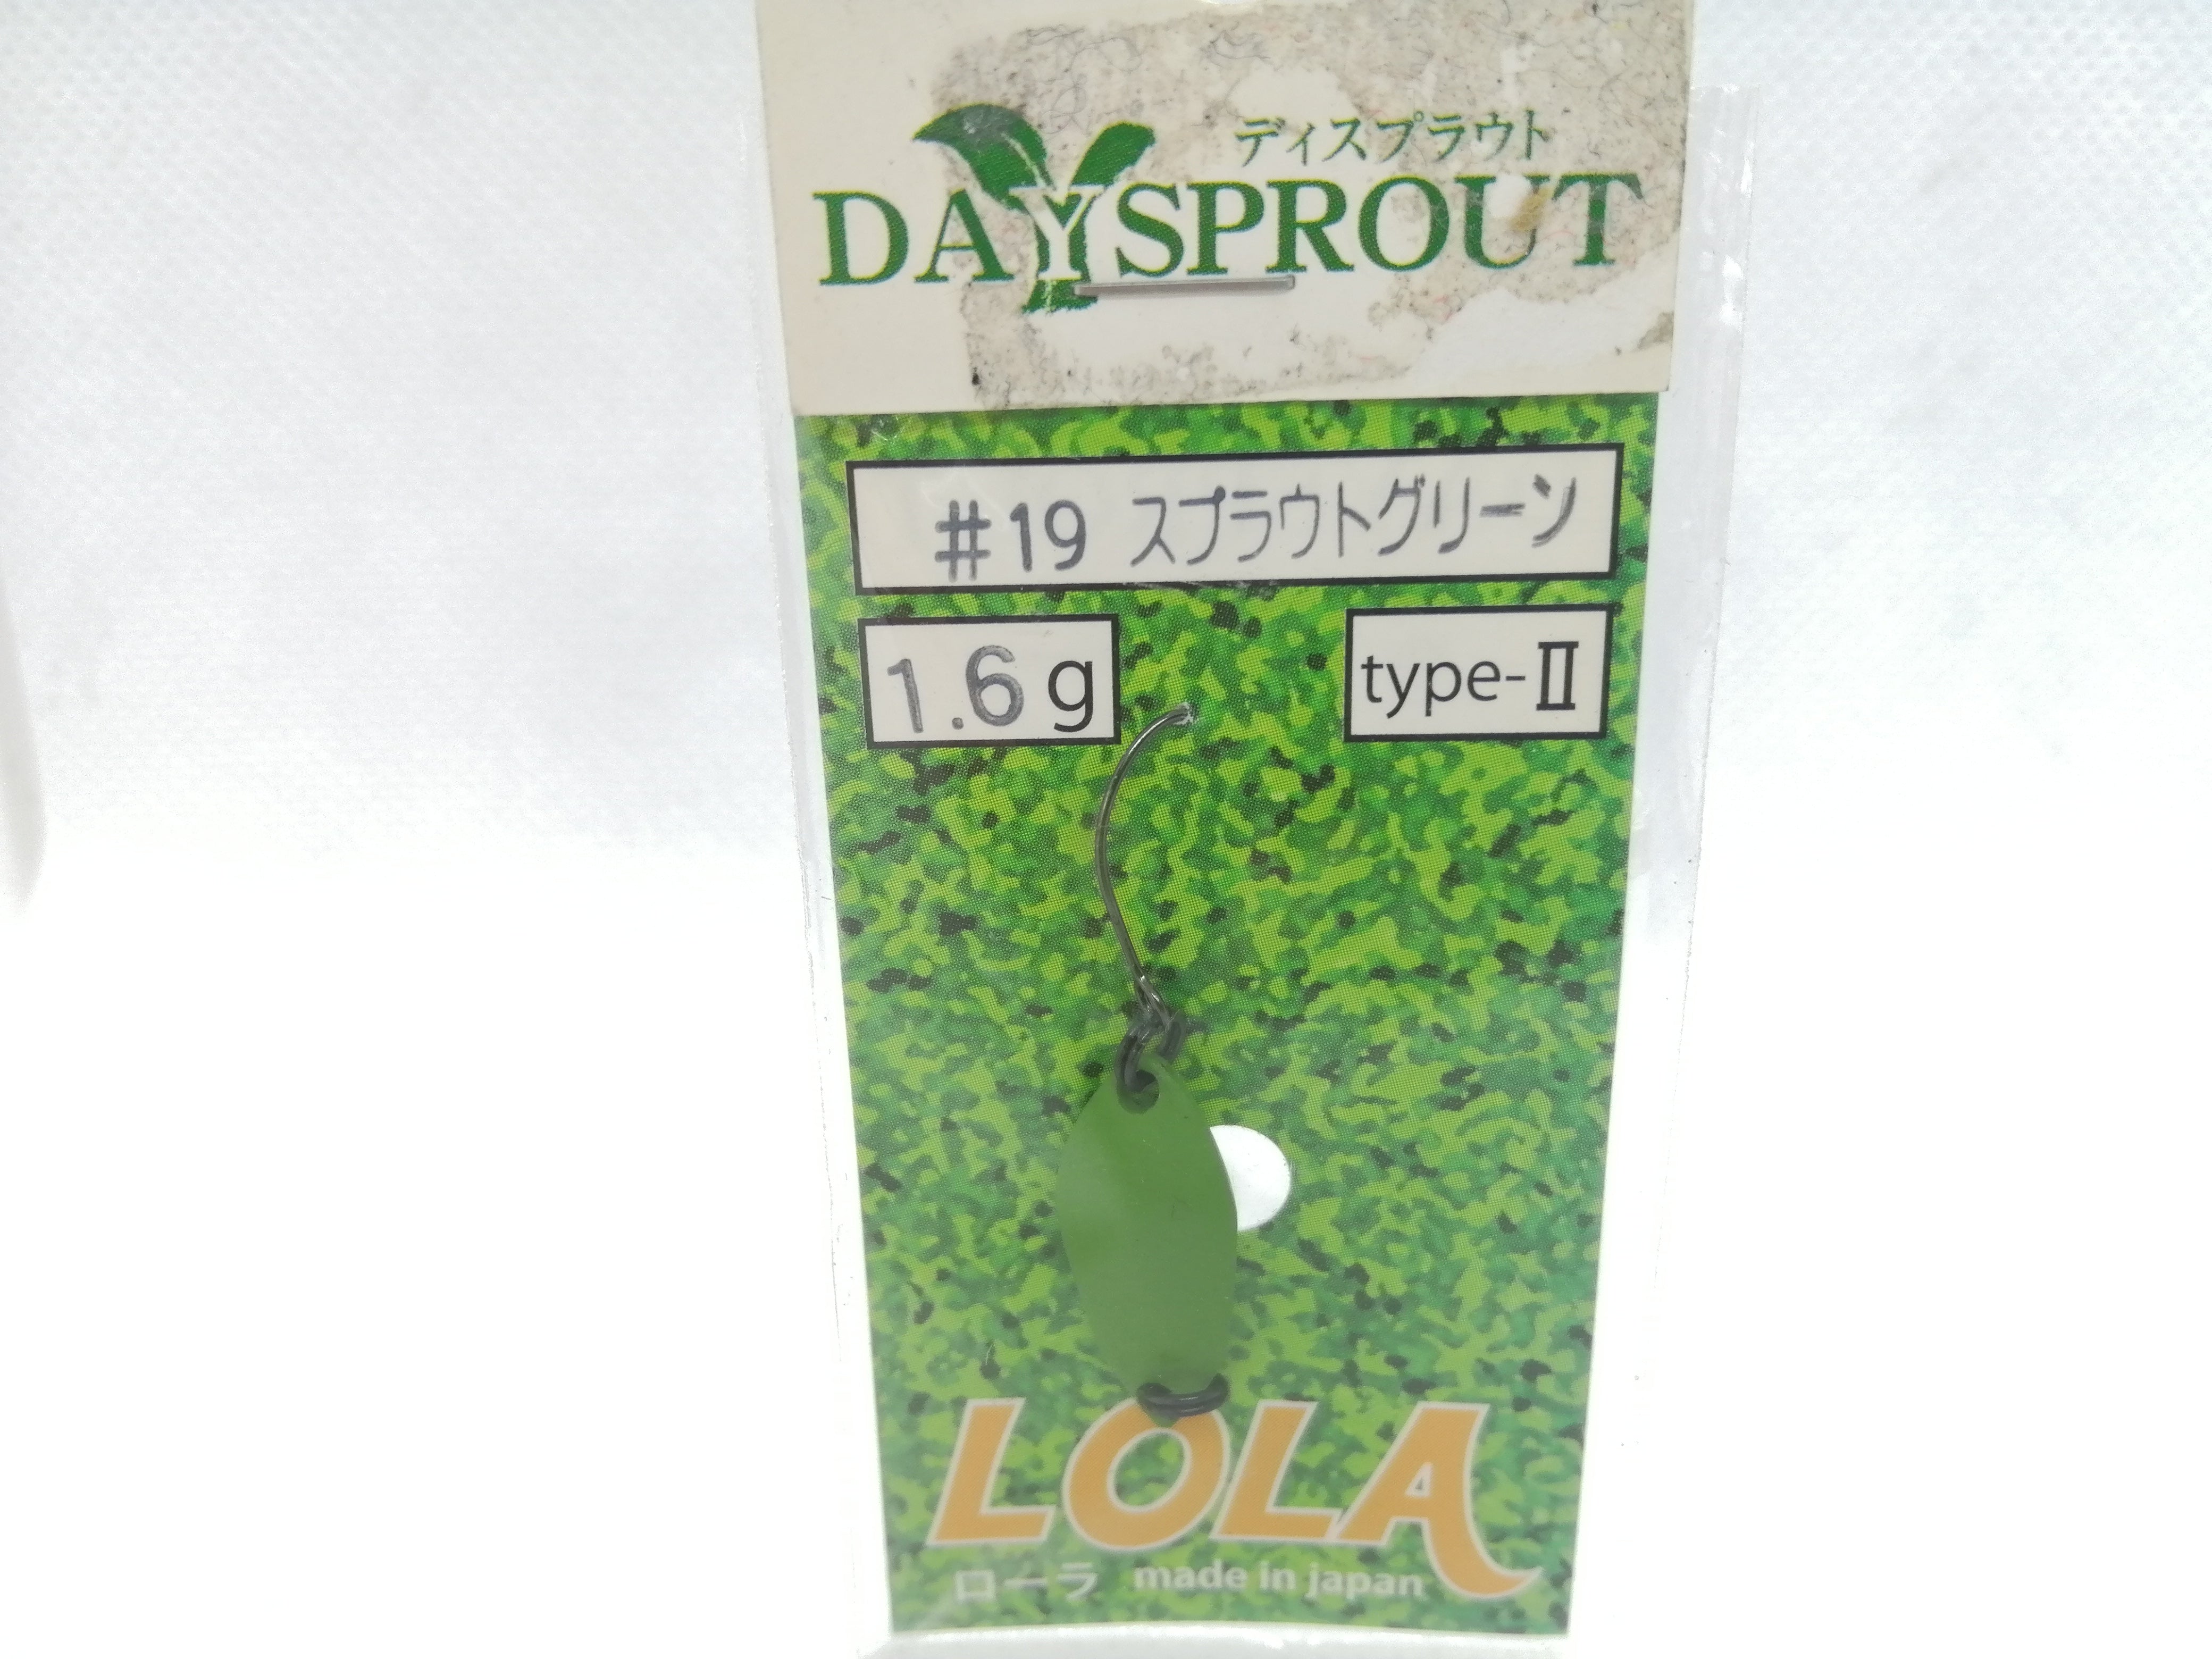 Lola type-II 1.6g #19 Sprout Green